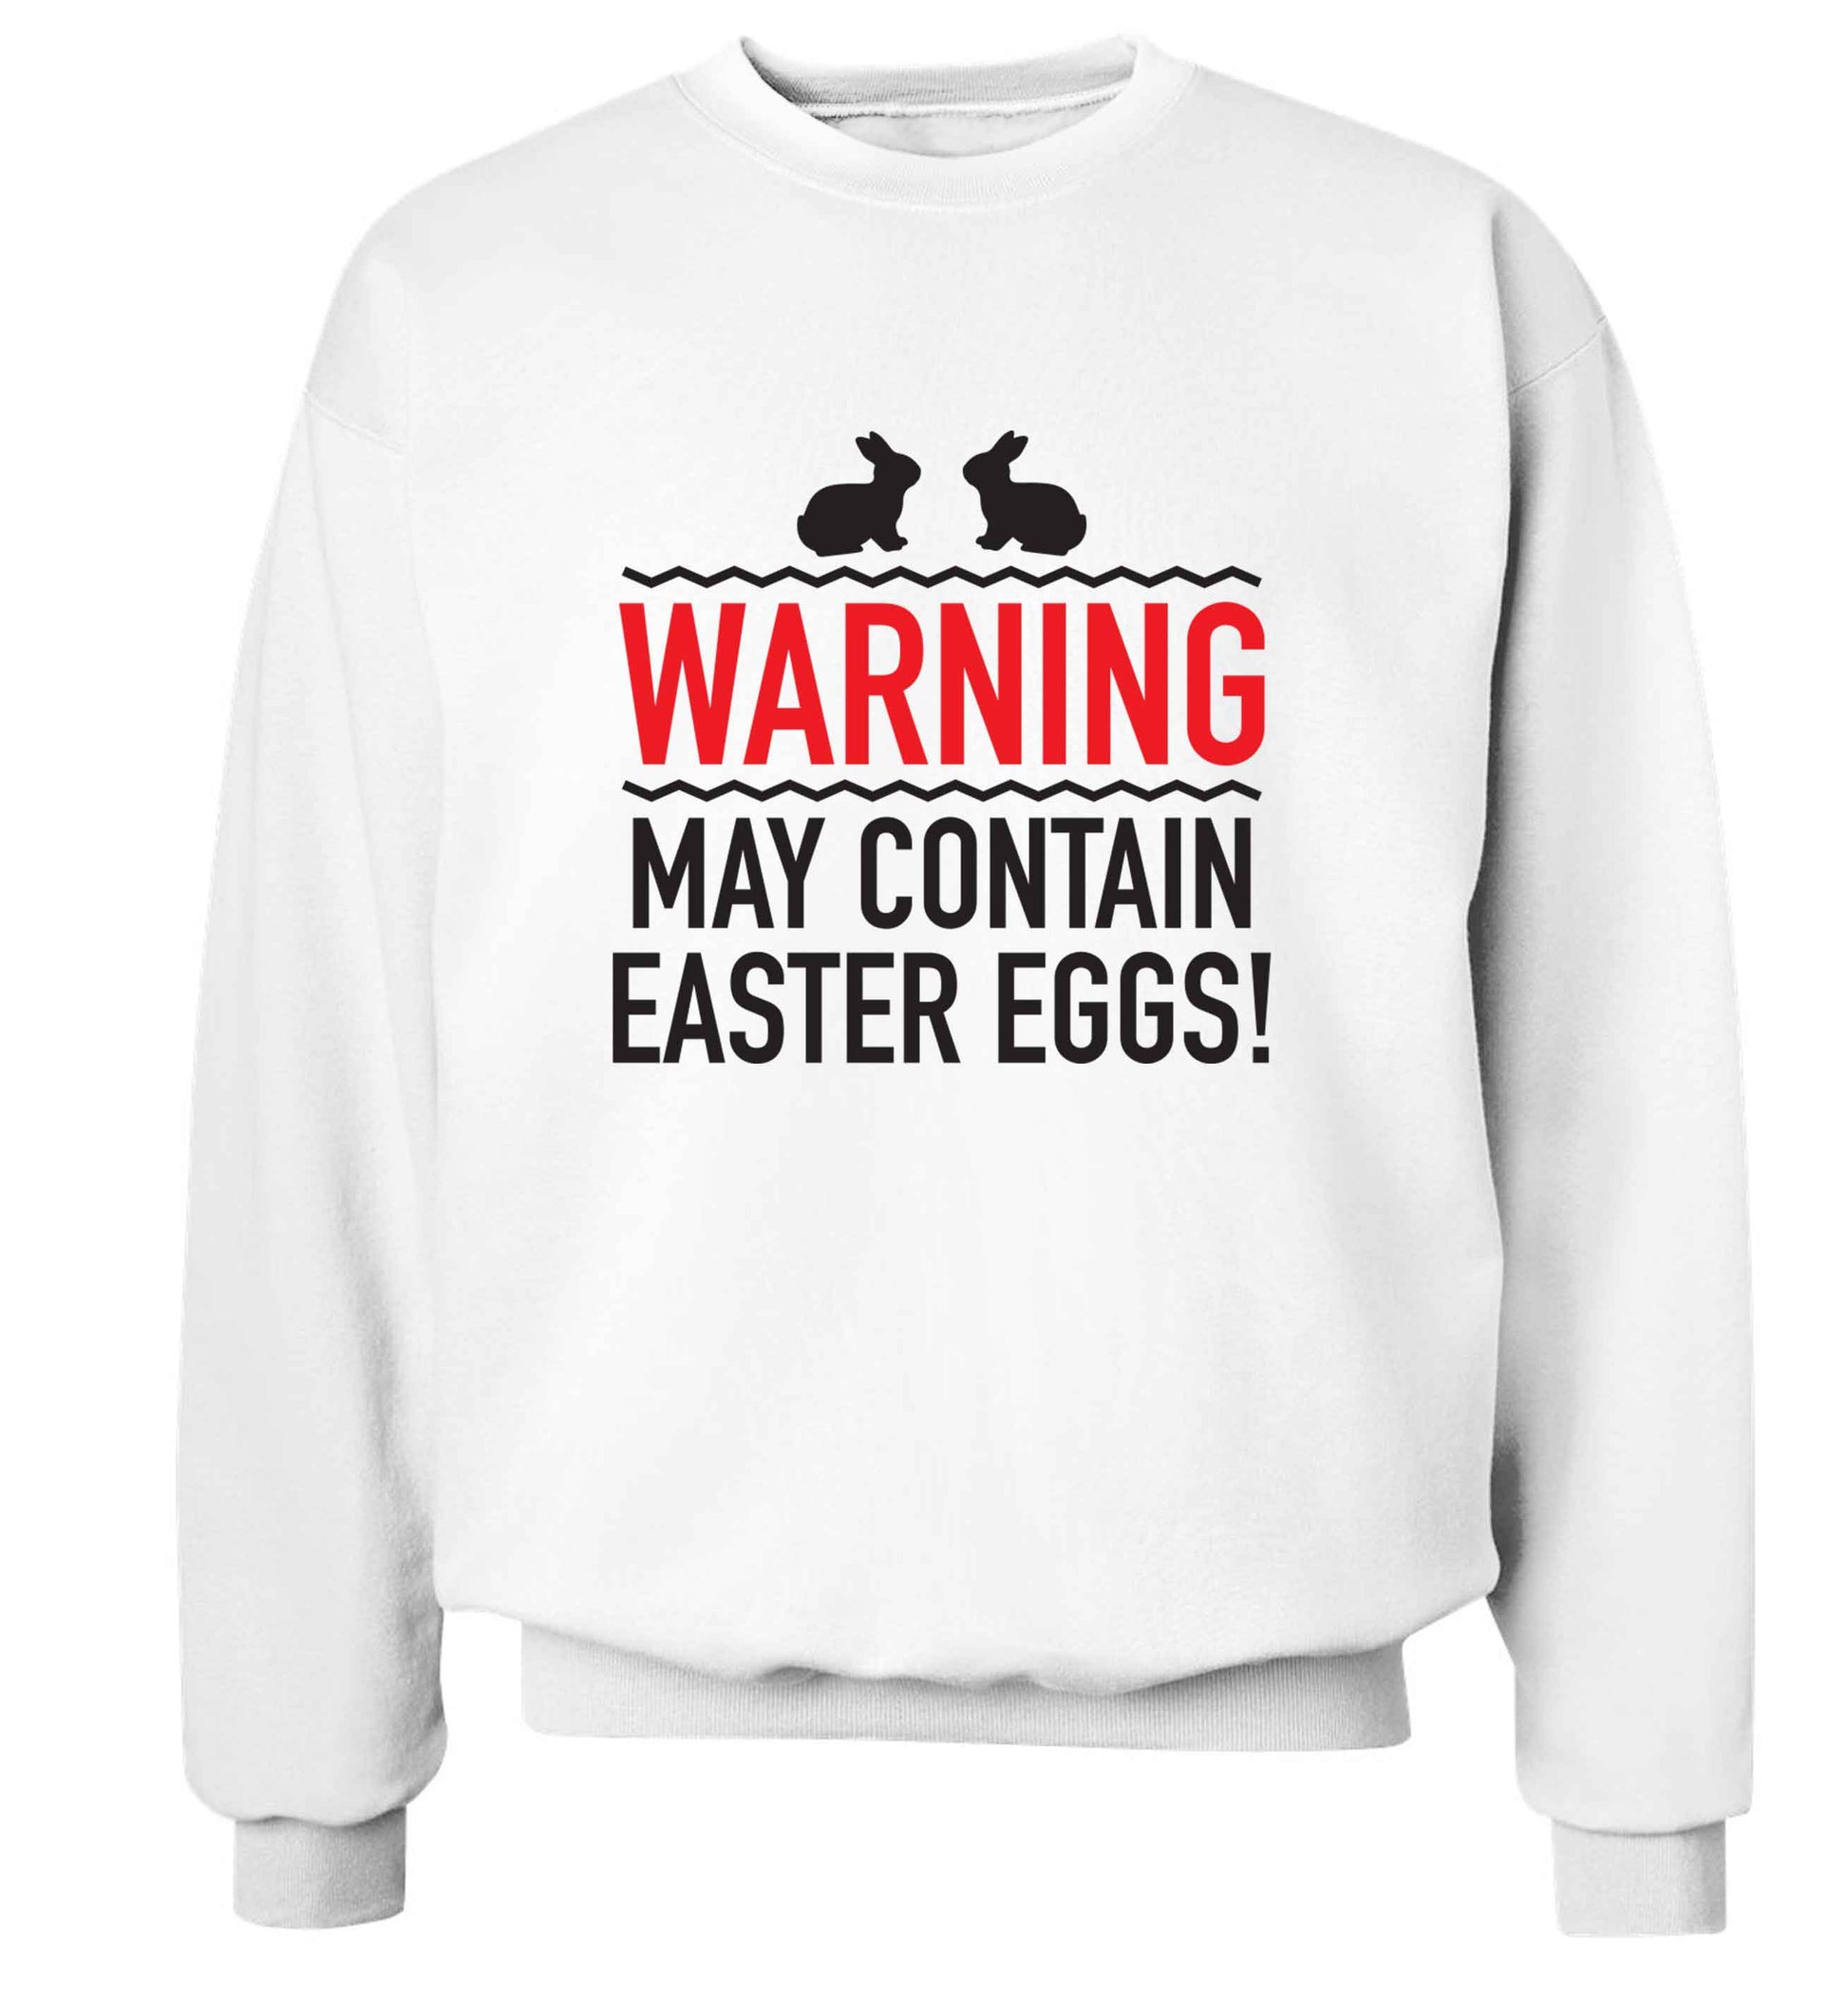 Warning may contain Easter eggs adult's unisex white sweater 2XL